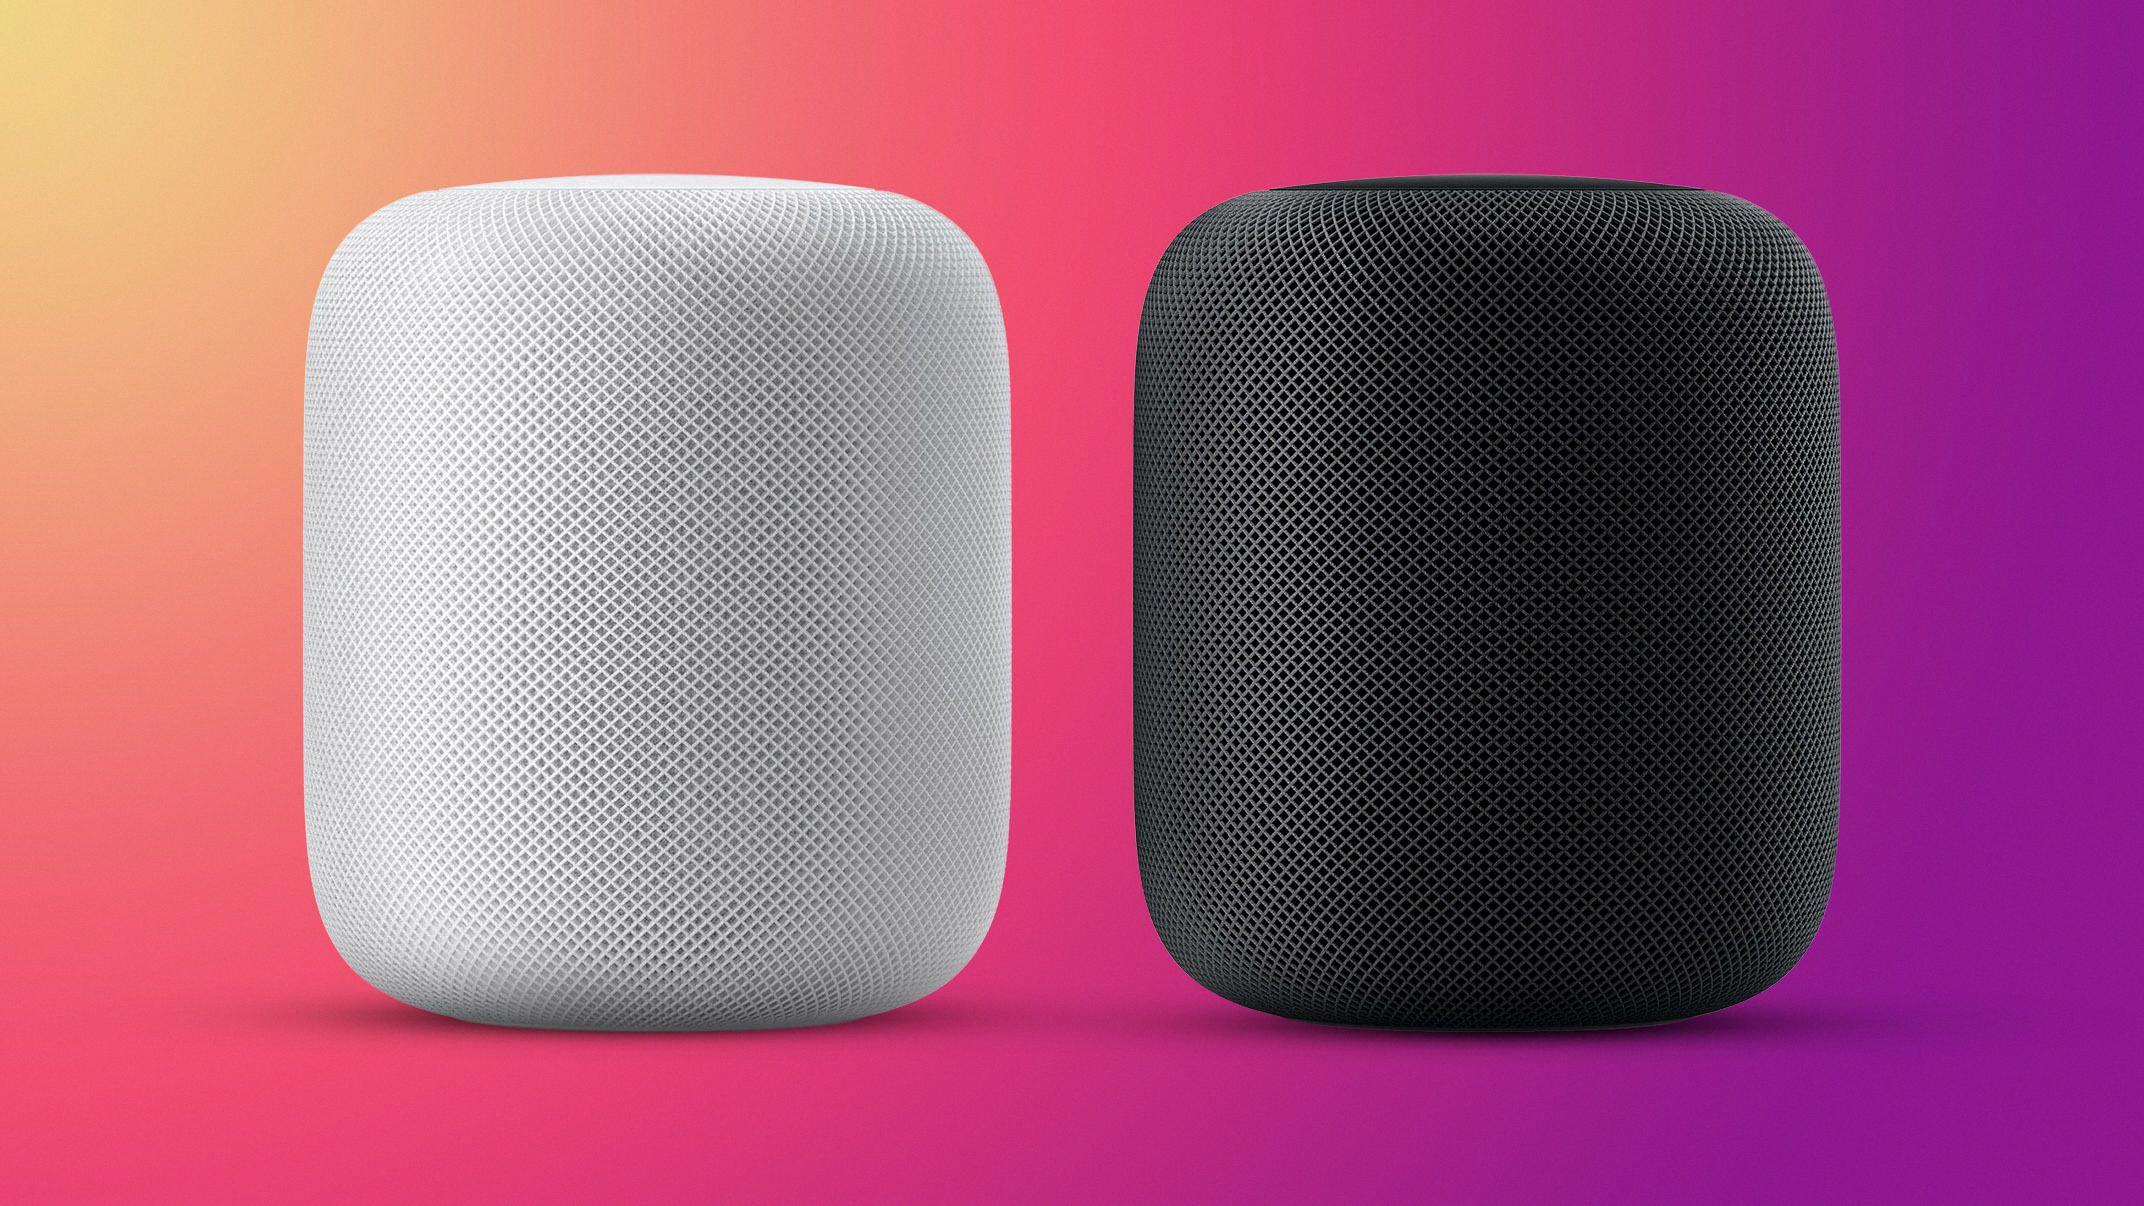 How to Fix HomePod That is Not Powering On? 15